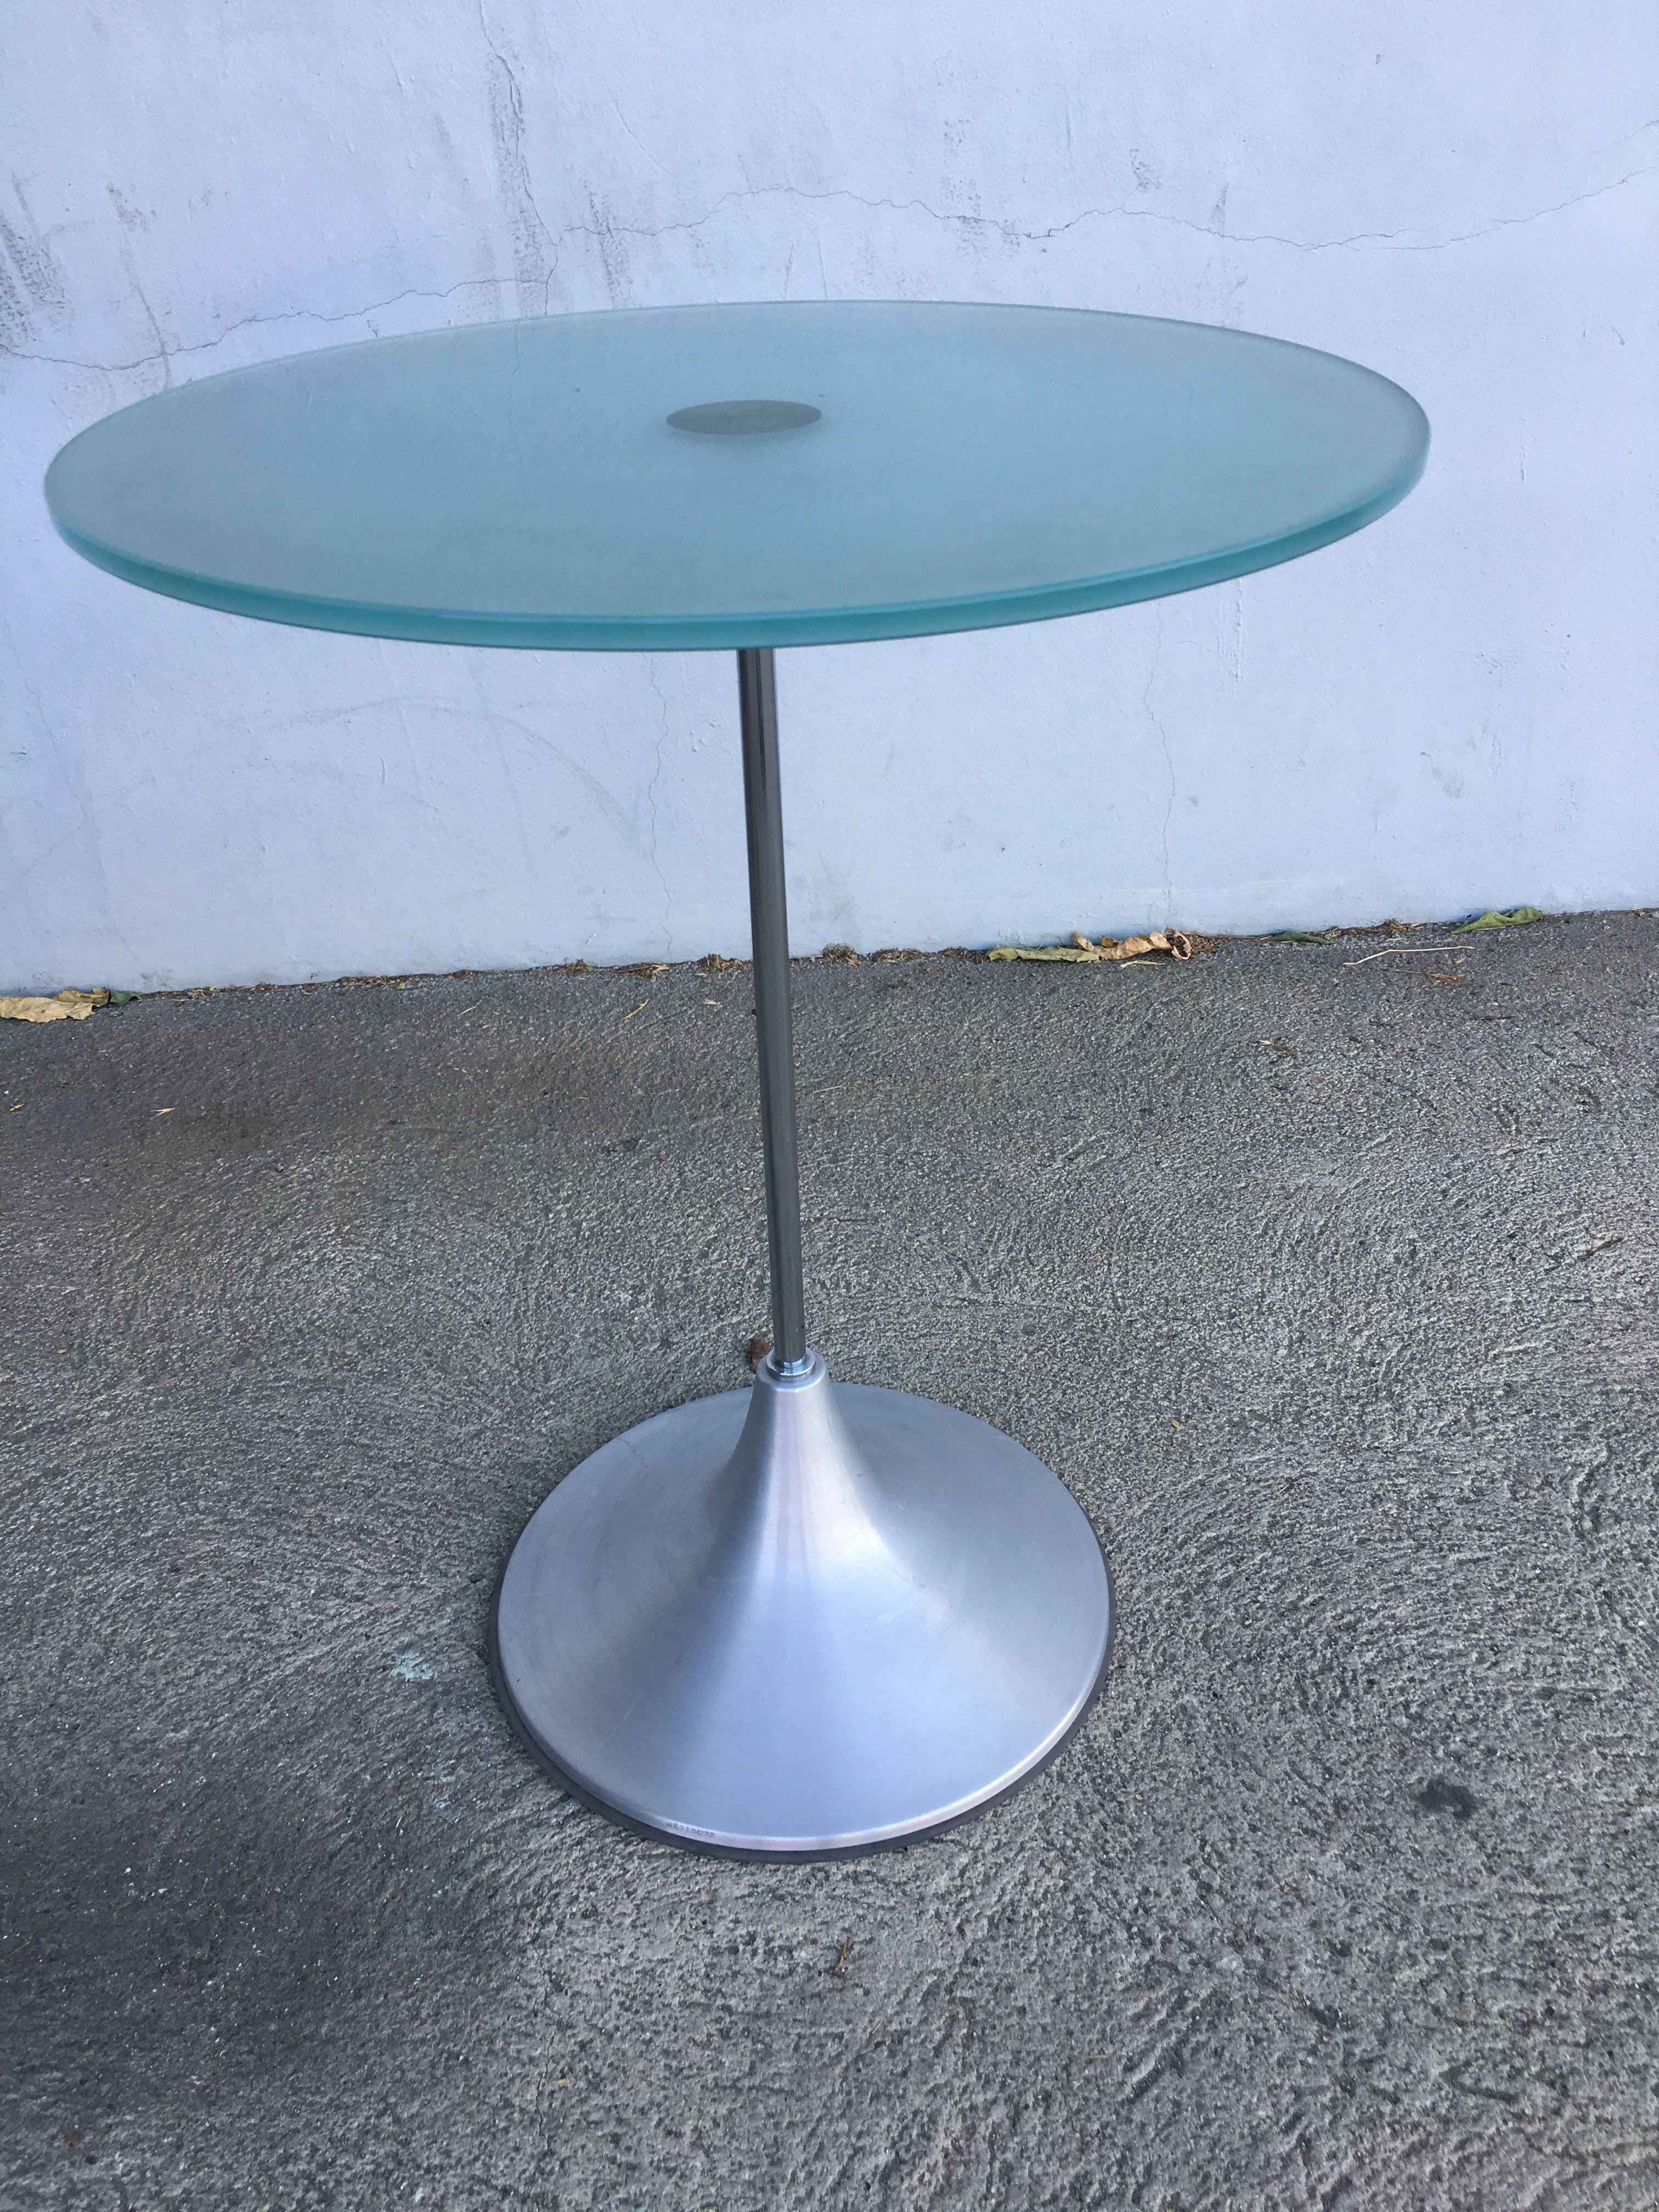 Modern round glass side table featuring a spun aluminum cone base with a coated chrome colored steel stem connected to the center of a round frosted glass top. Available-6, circa 2000.